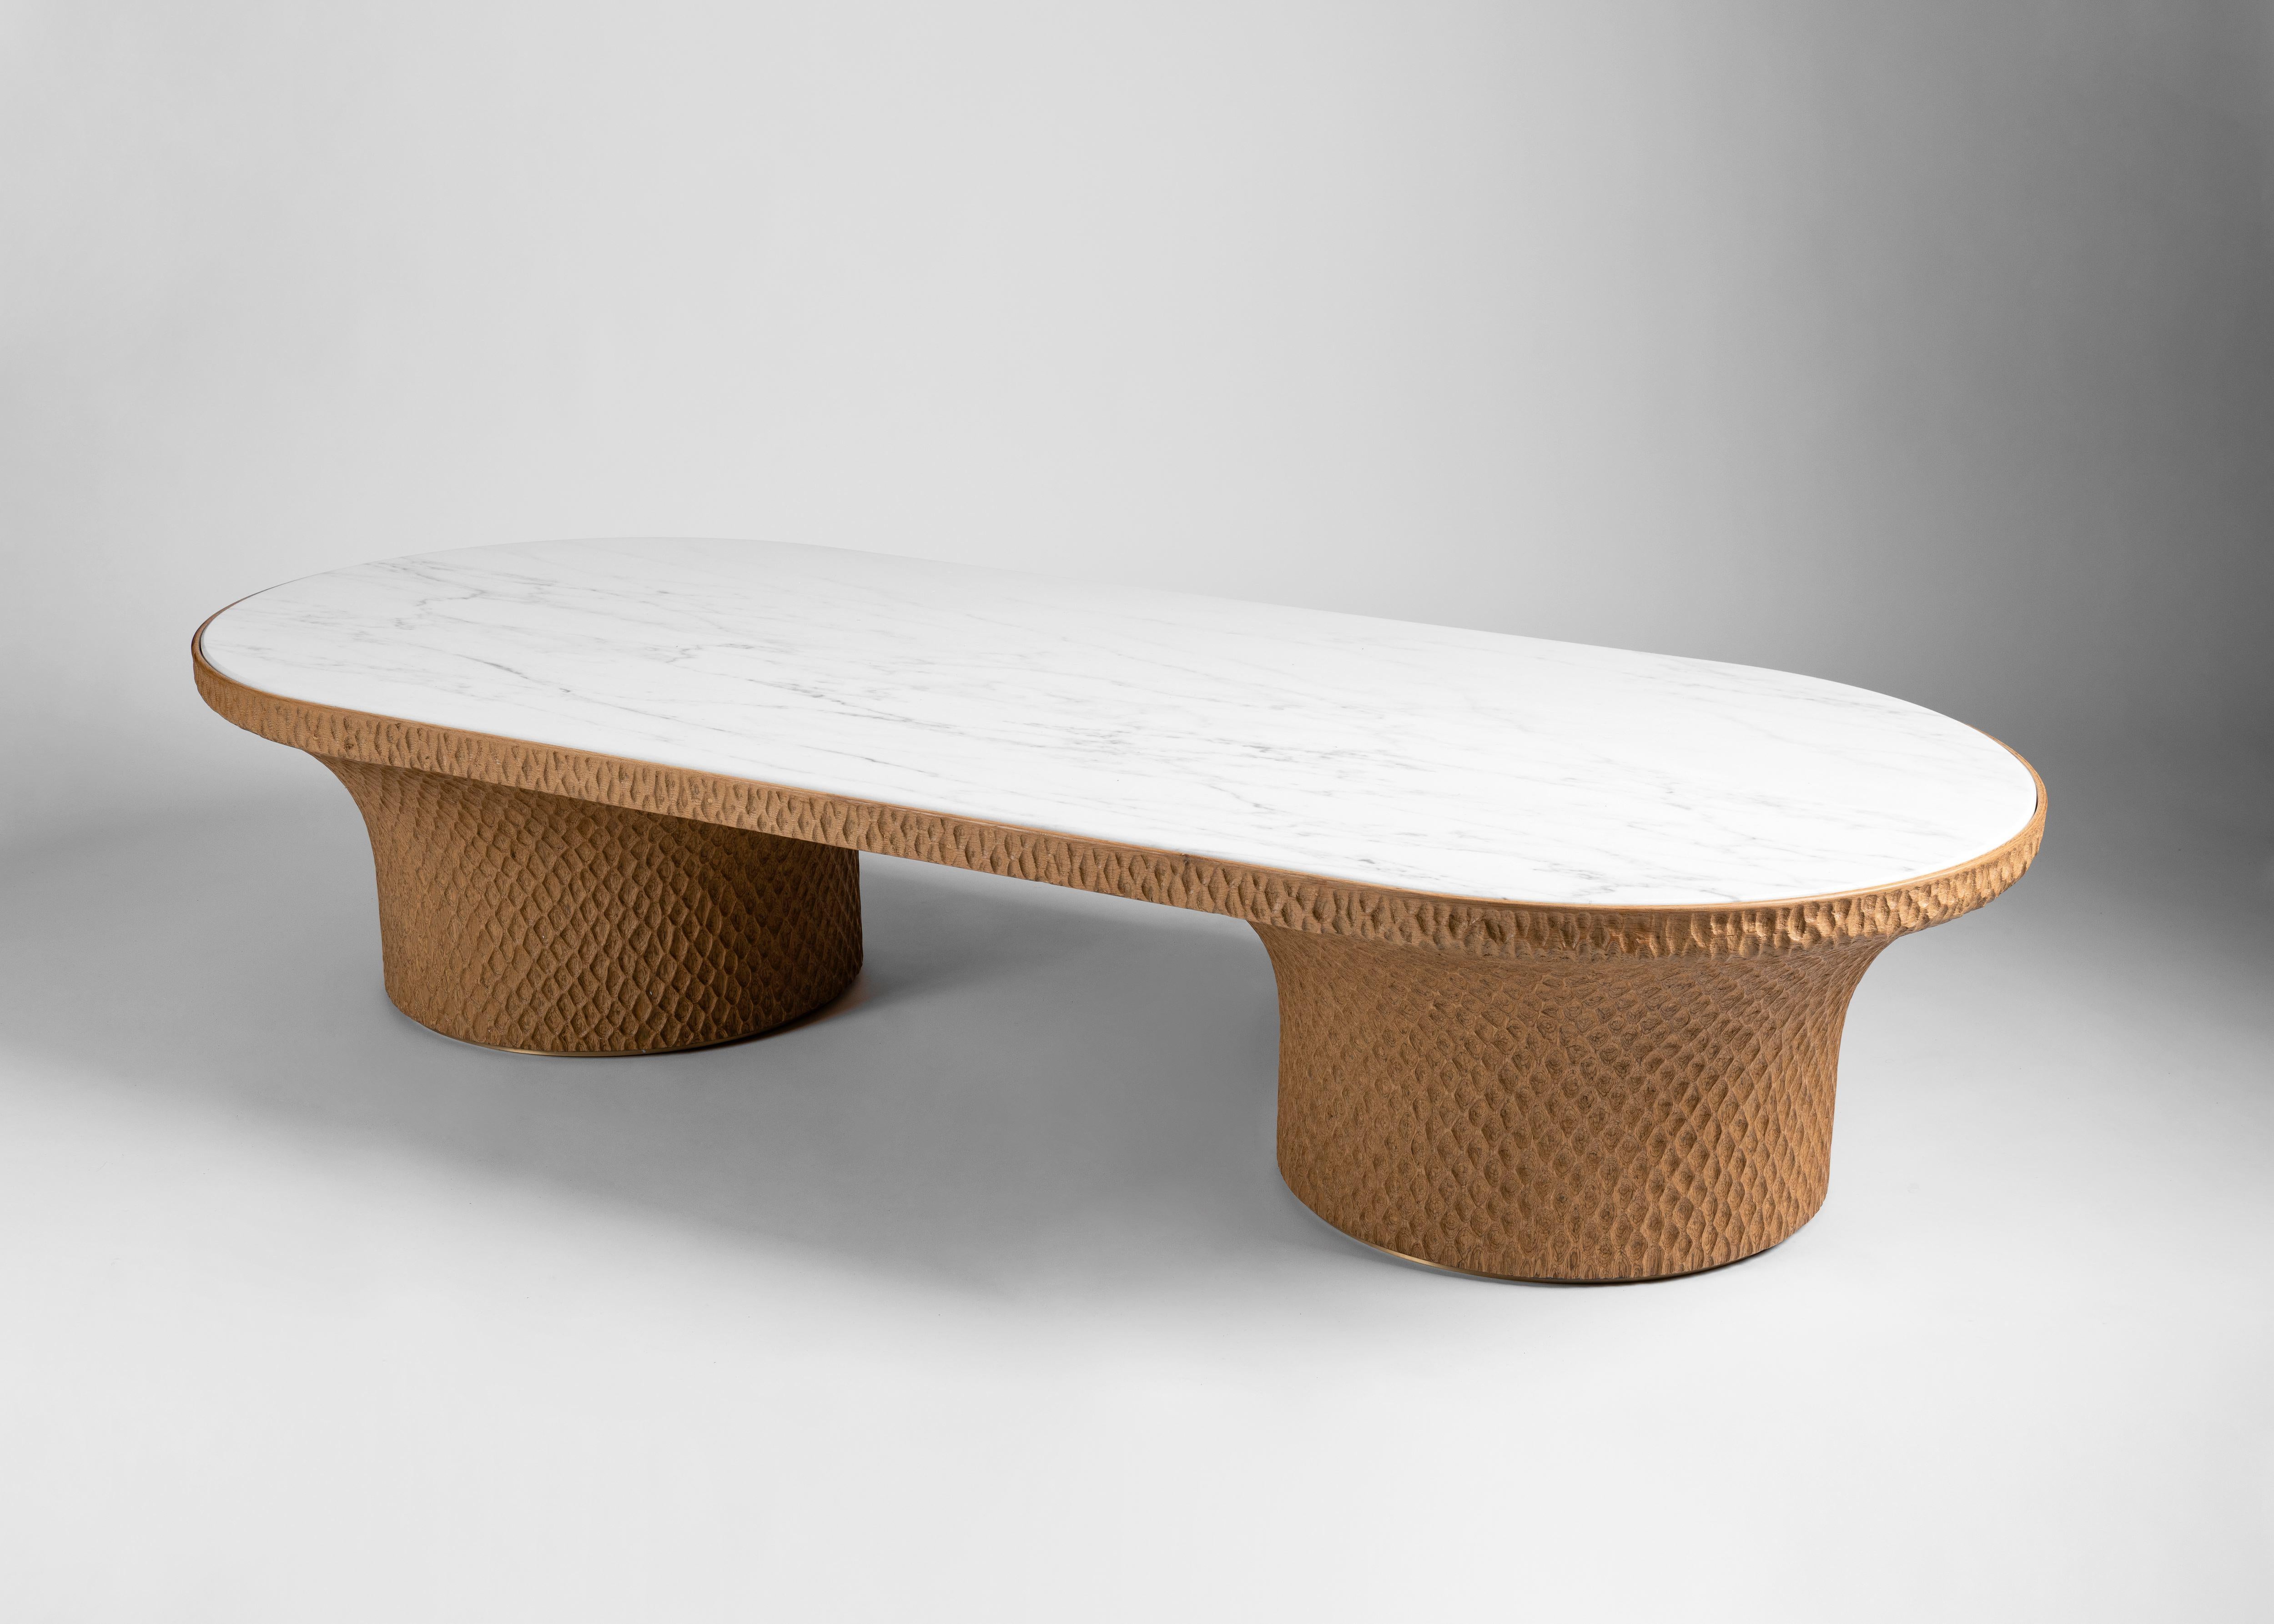 Thomas Trad, Uroko Contemporary Coffee Table, Lebanon, 2019 In New Condition For Sale In New York, NY